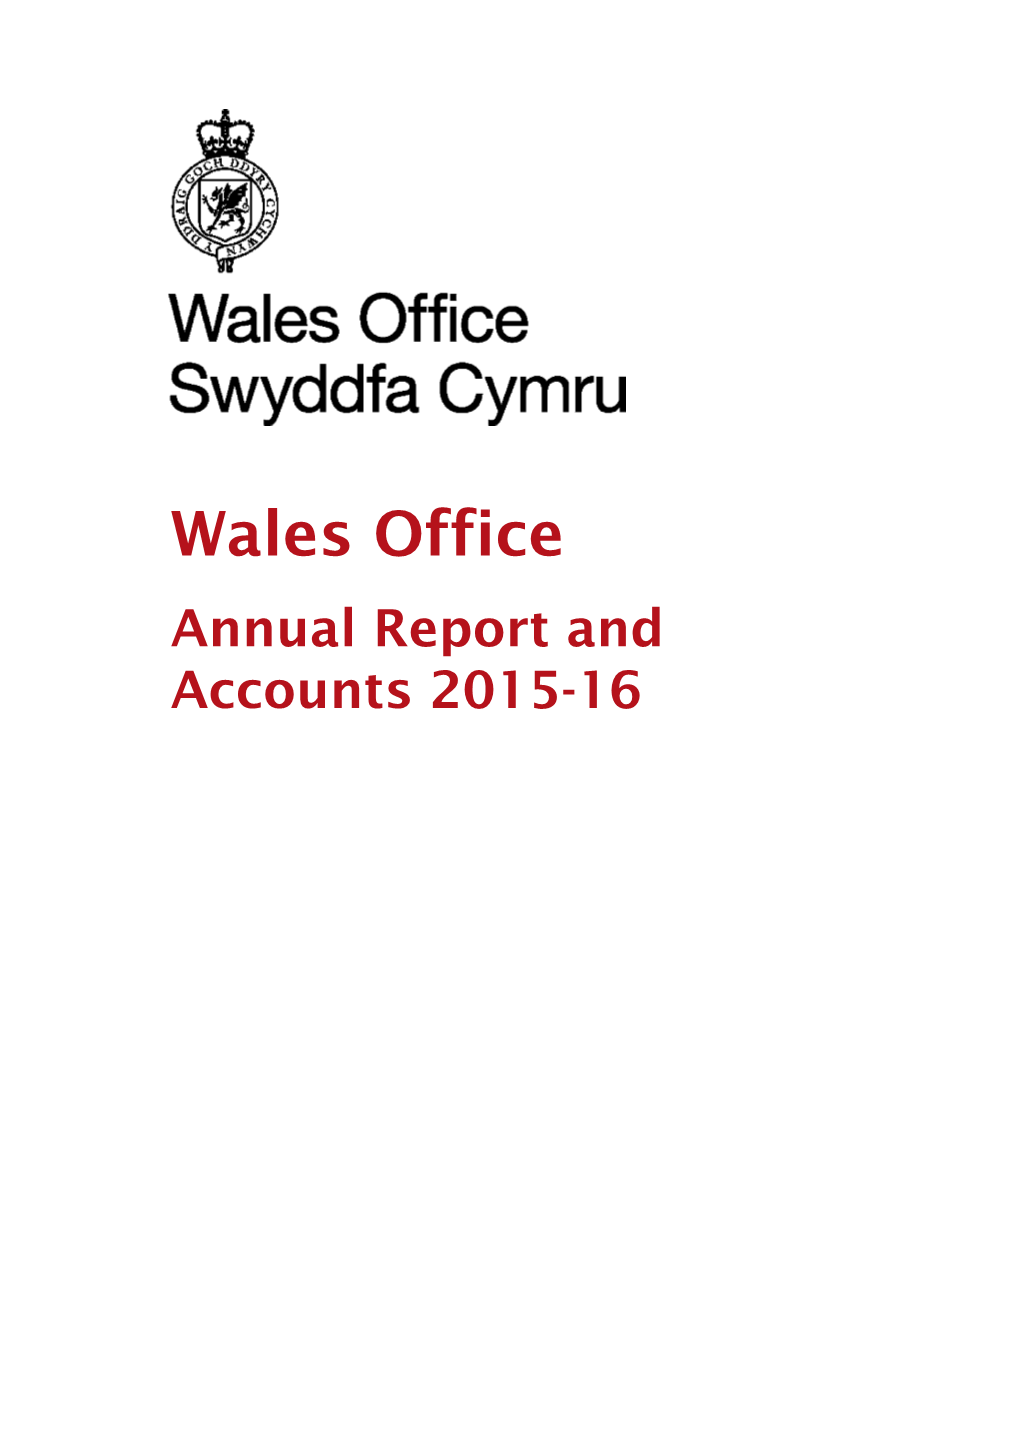 Wales Office Annual Report and Accounts 2015-16